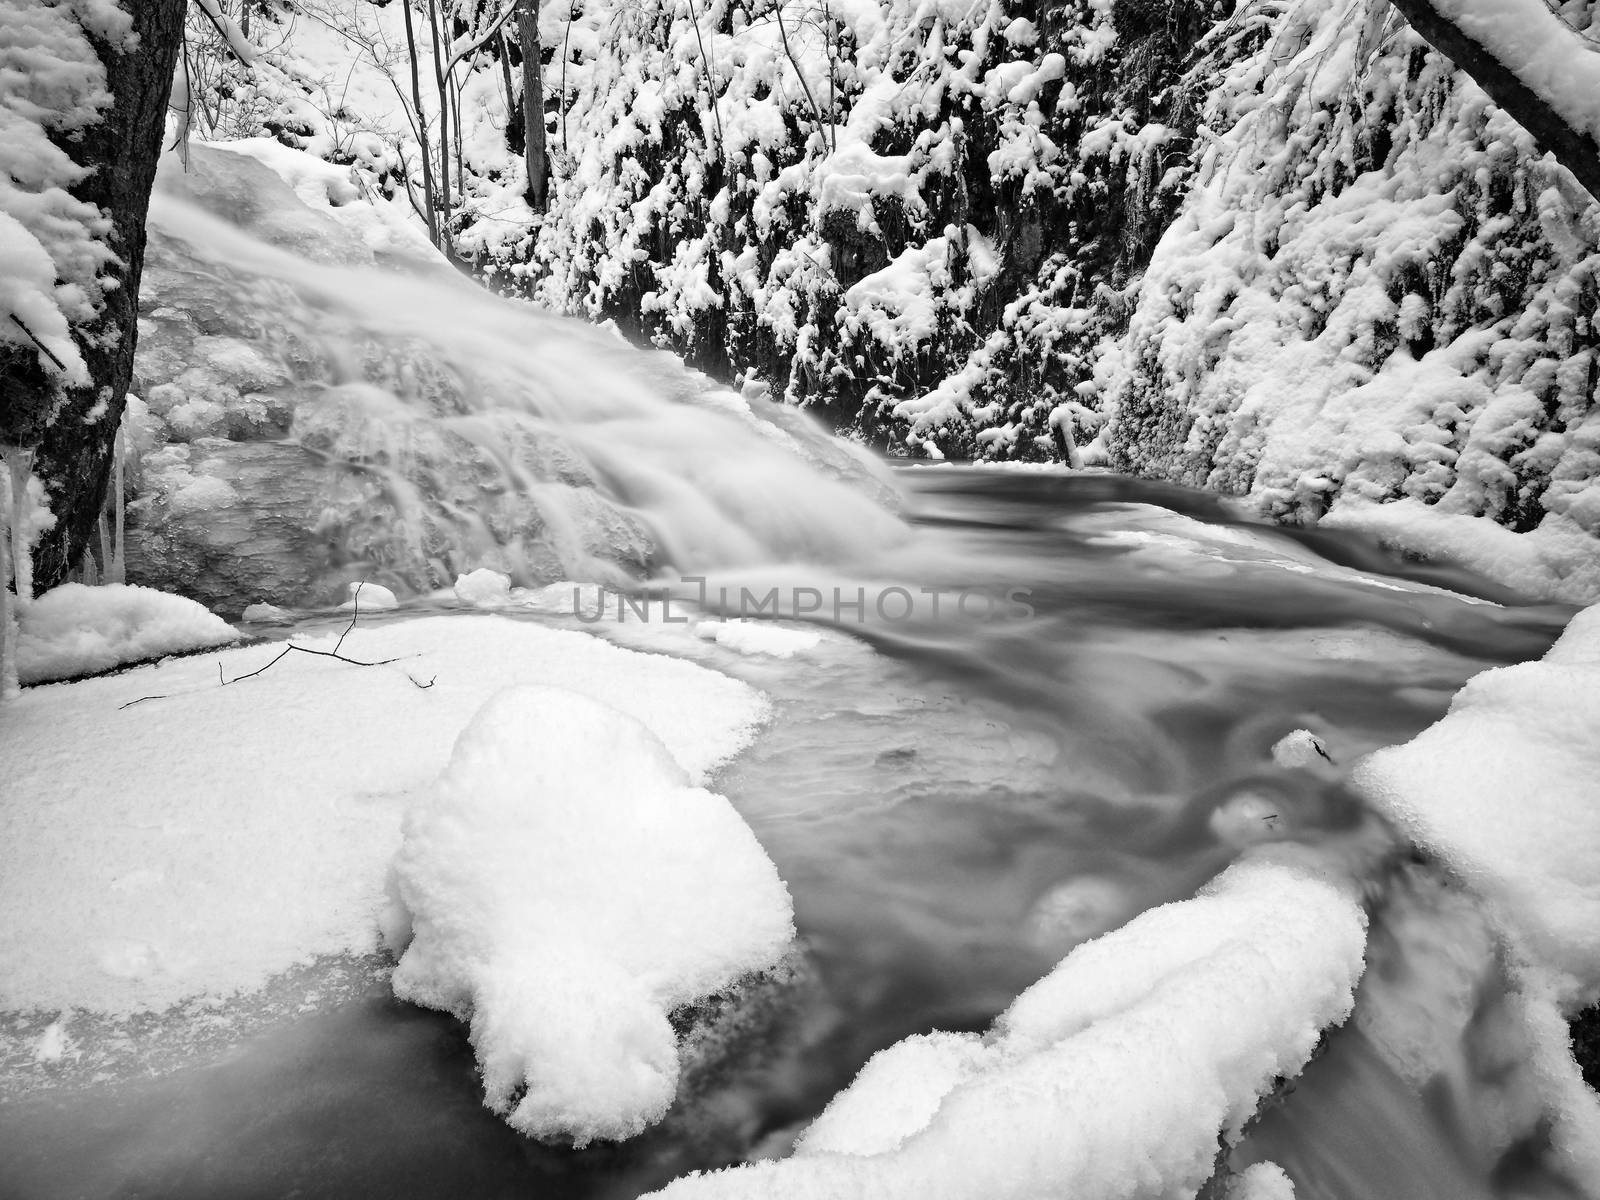 Frozen cascade of waterfall, icy twigs and icy boulders in frozen foam of rapid stream. Winter creek. Extreme freeze. by rdonar2